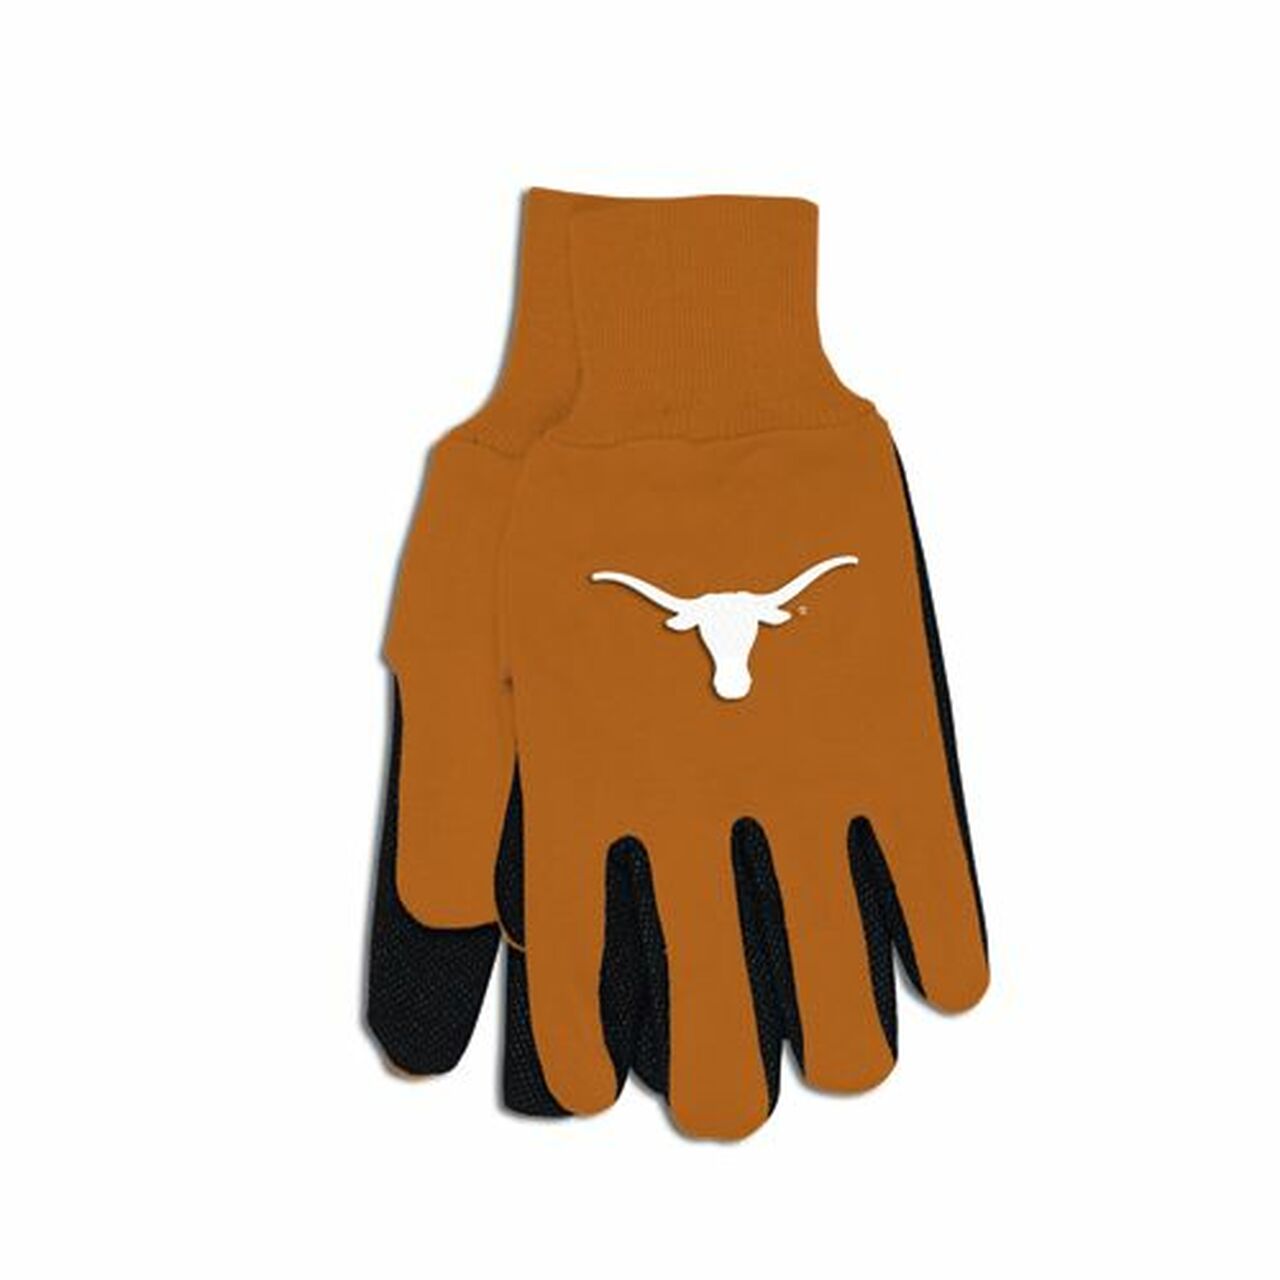 Texas Longhorns Two Tone Adult Size Gloves by Wincraft